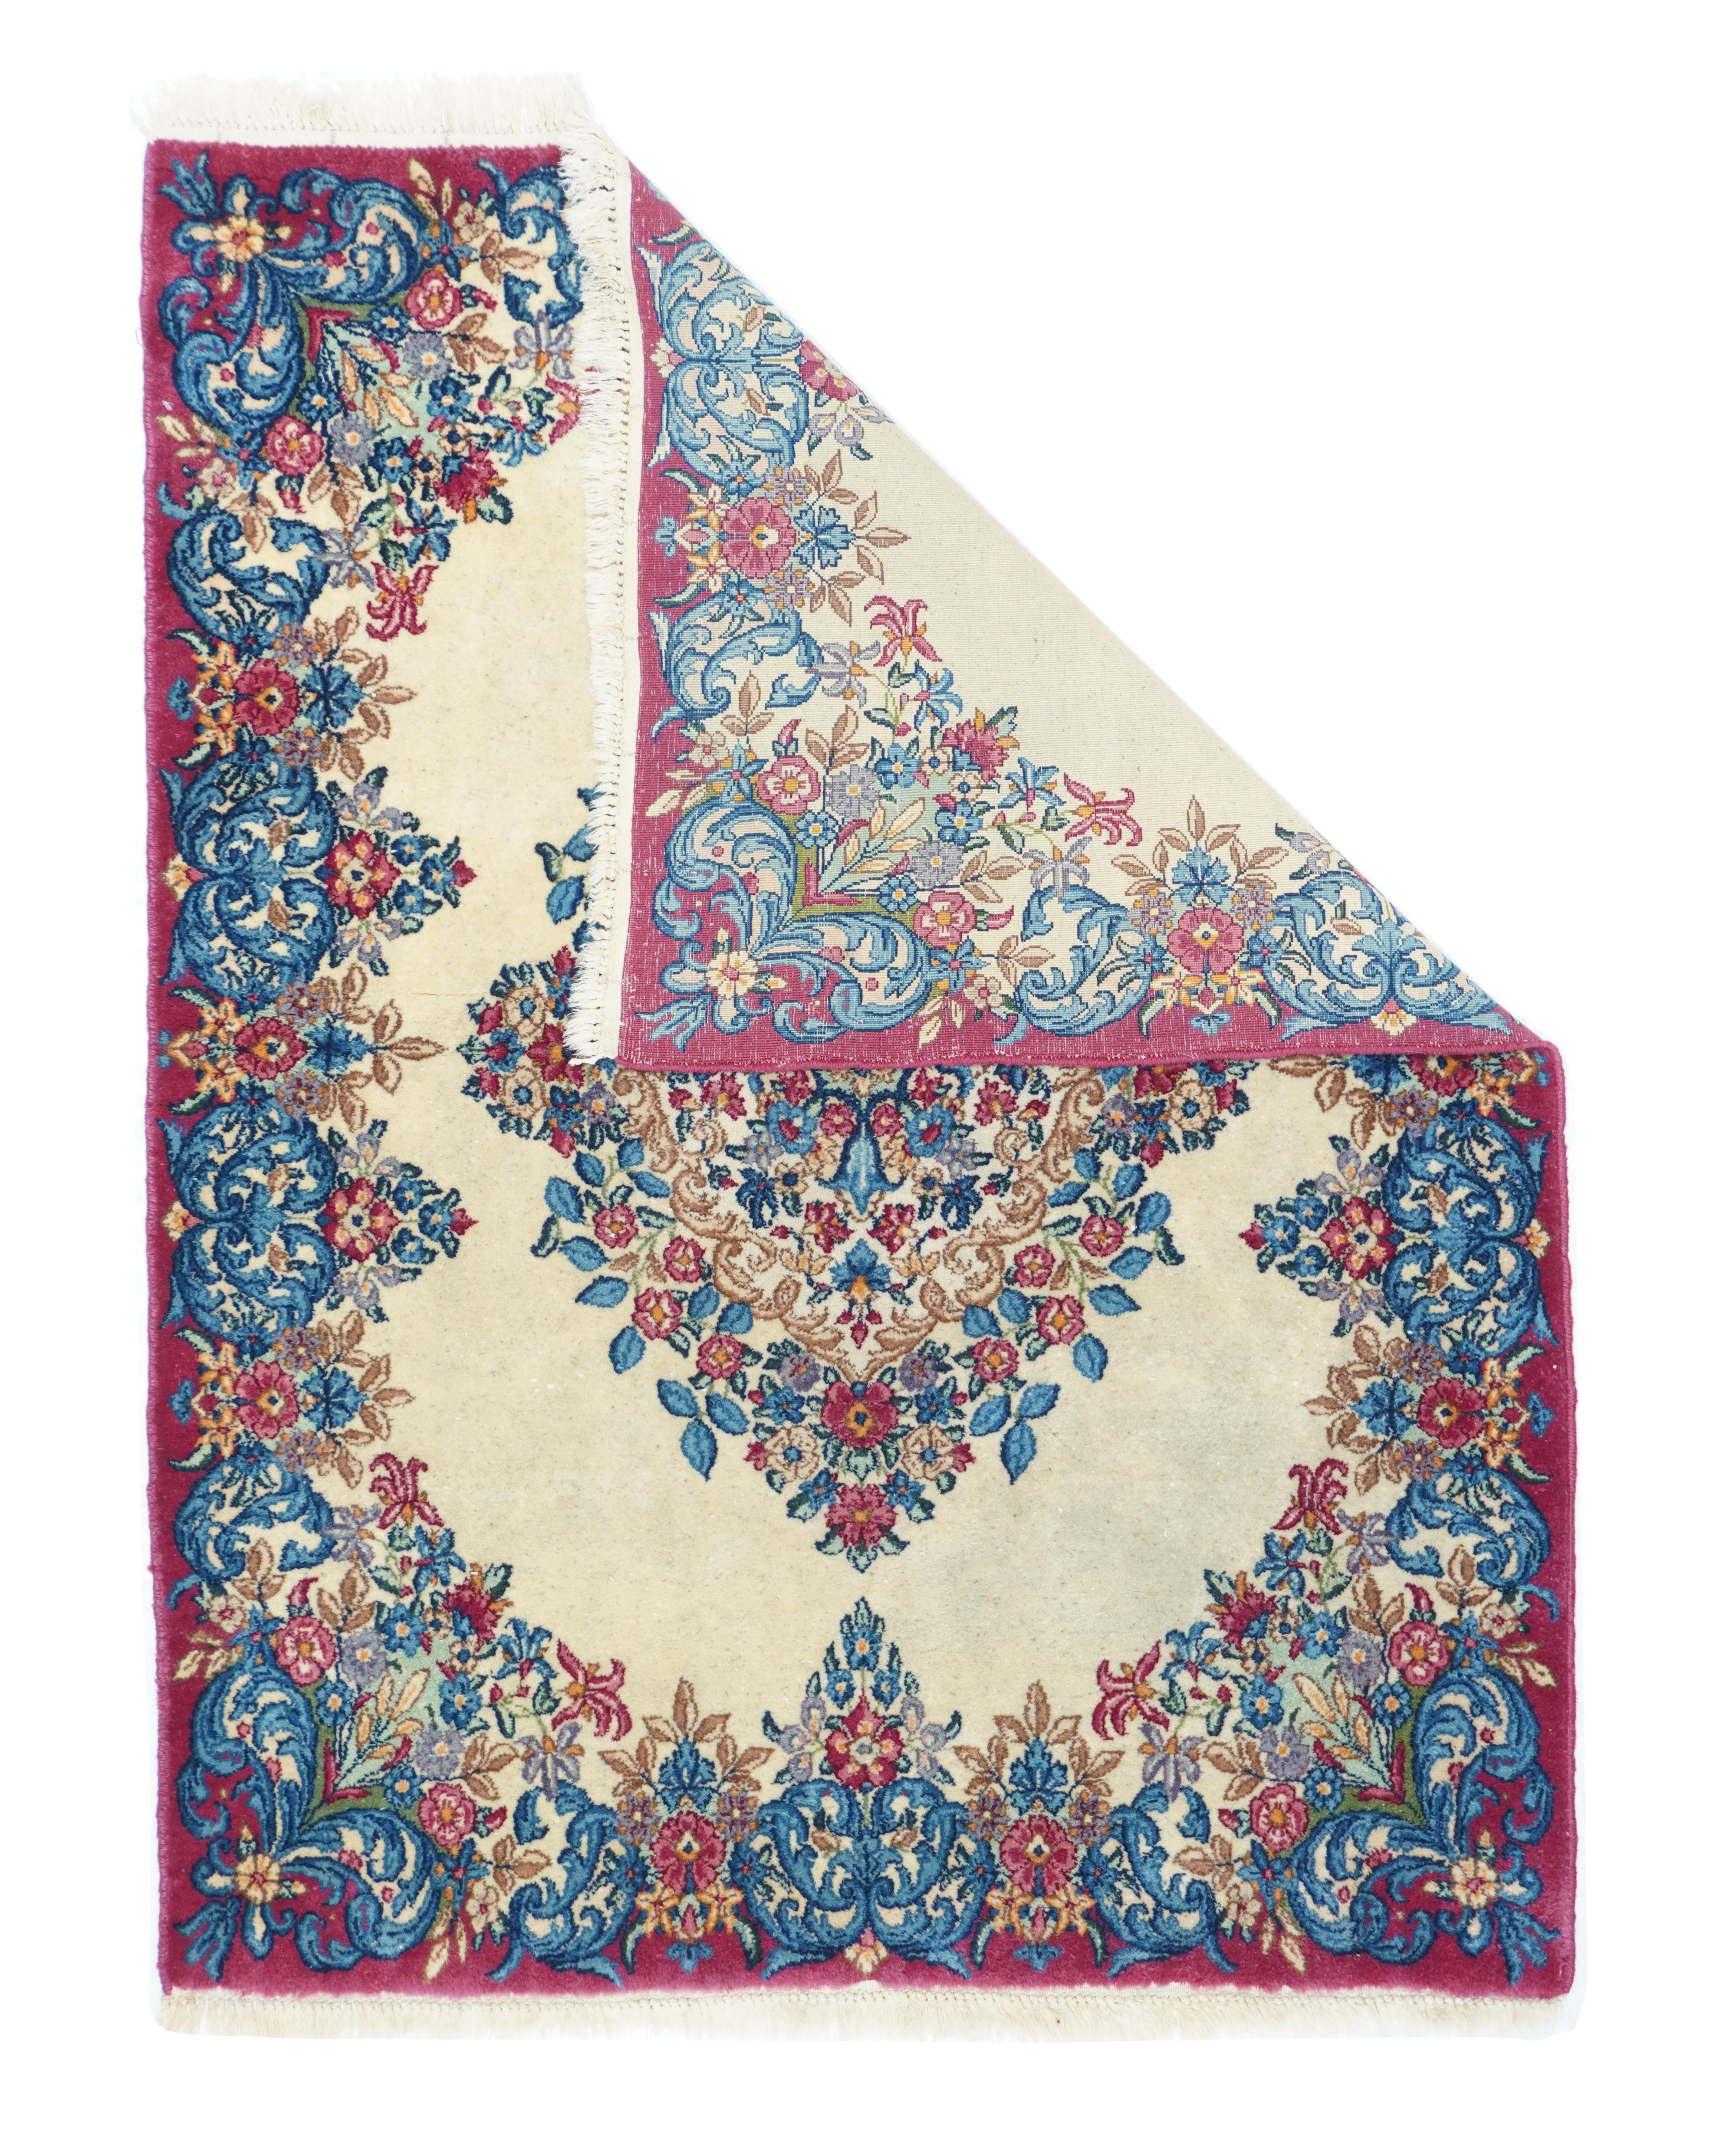 Vintage Kerman Lavar rug¬†3'11'' x 5'3''. The straw-ivory open field of this SE Persian urban scatter shows a complex floral medallion with and innermost light blue rosettes and floral wreaths accented in red, rose, light blue and dark blue, with en